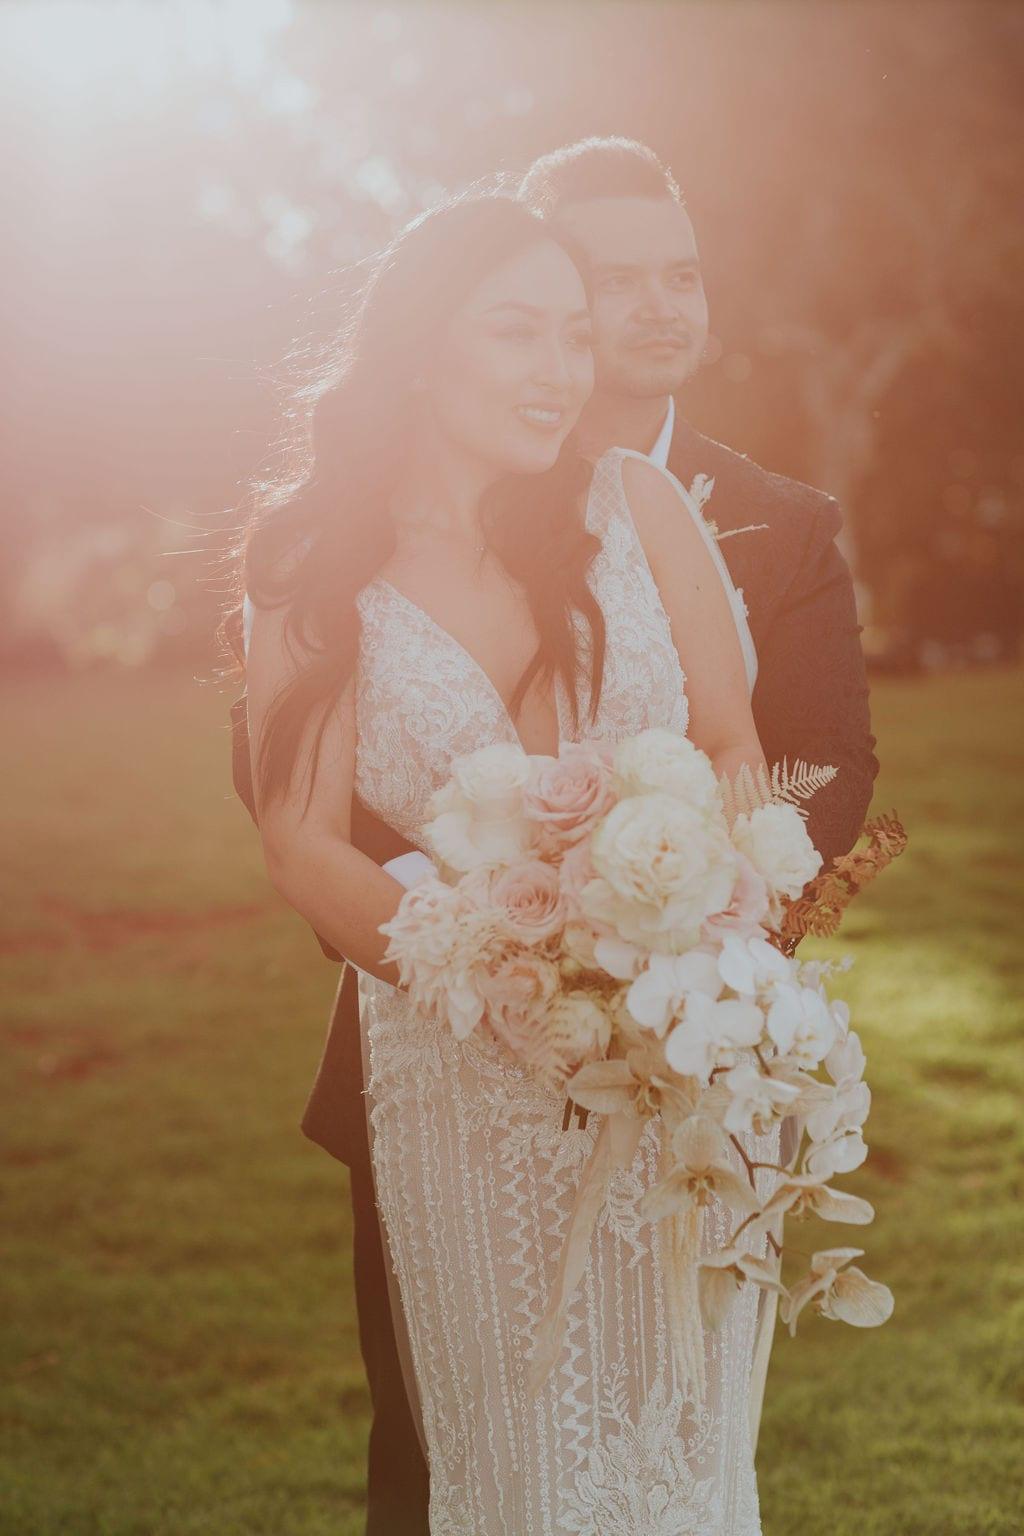 Vimvipa & Paul - A Scenic Fairytale Wedding - White Lily Couture